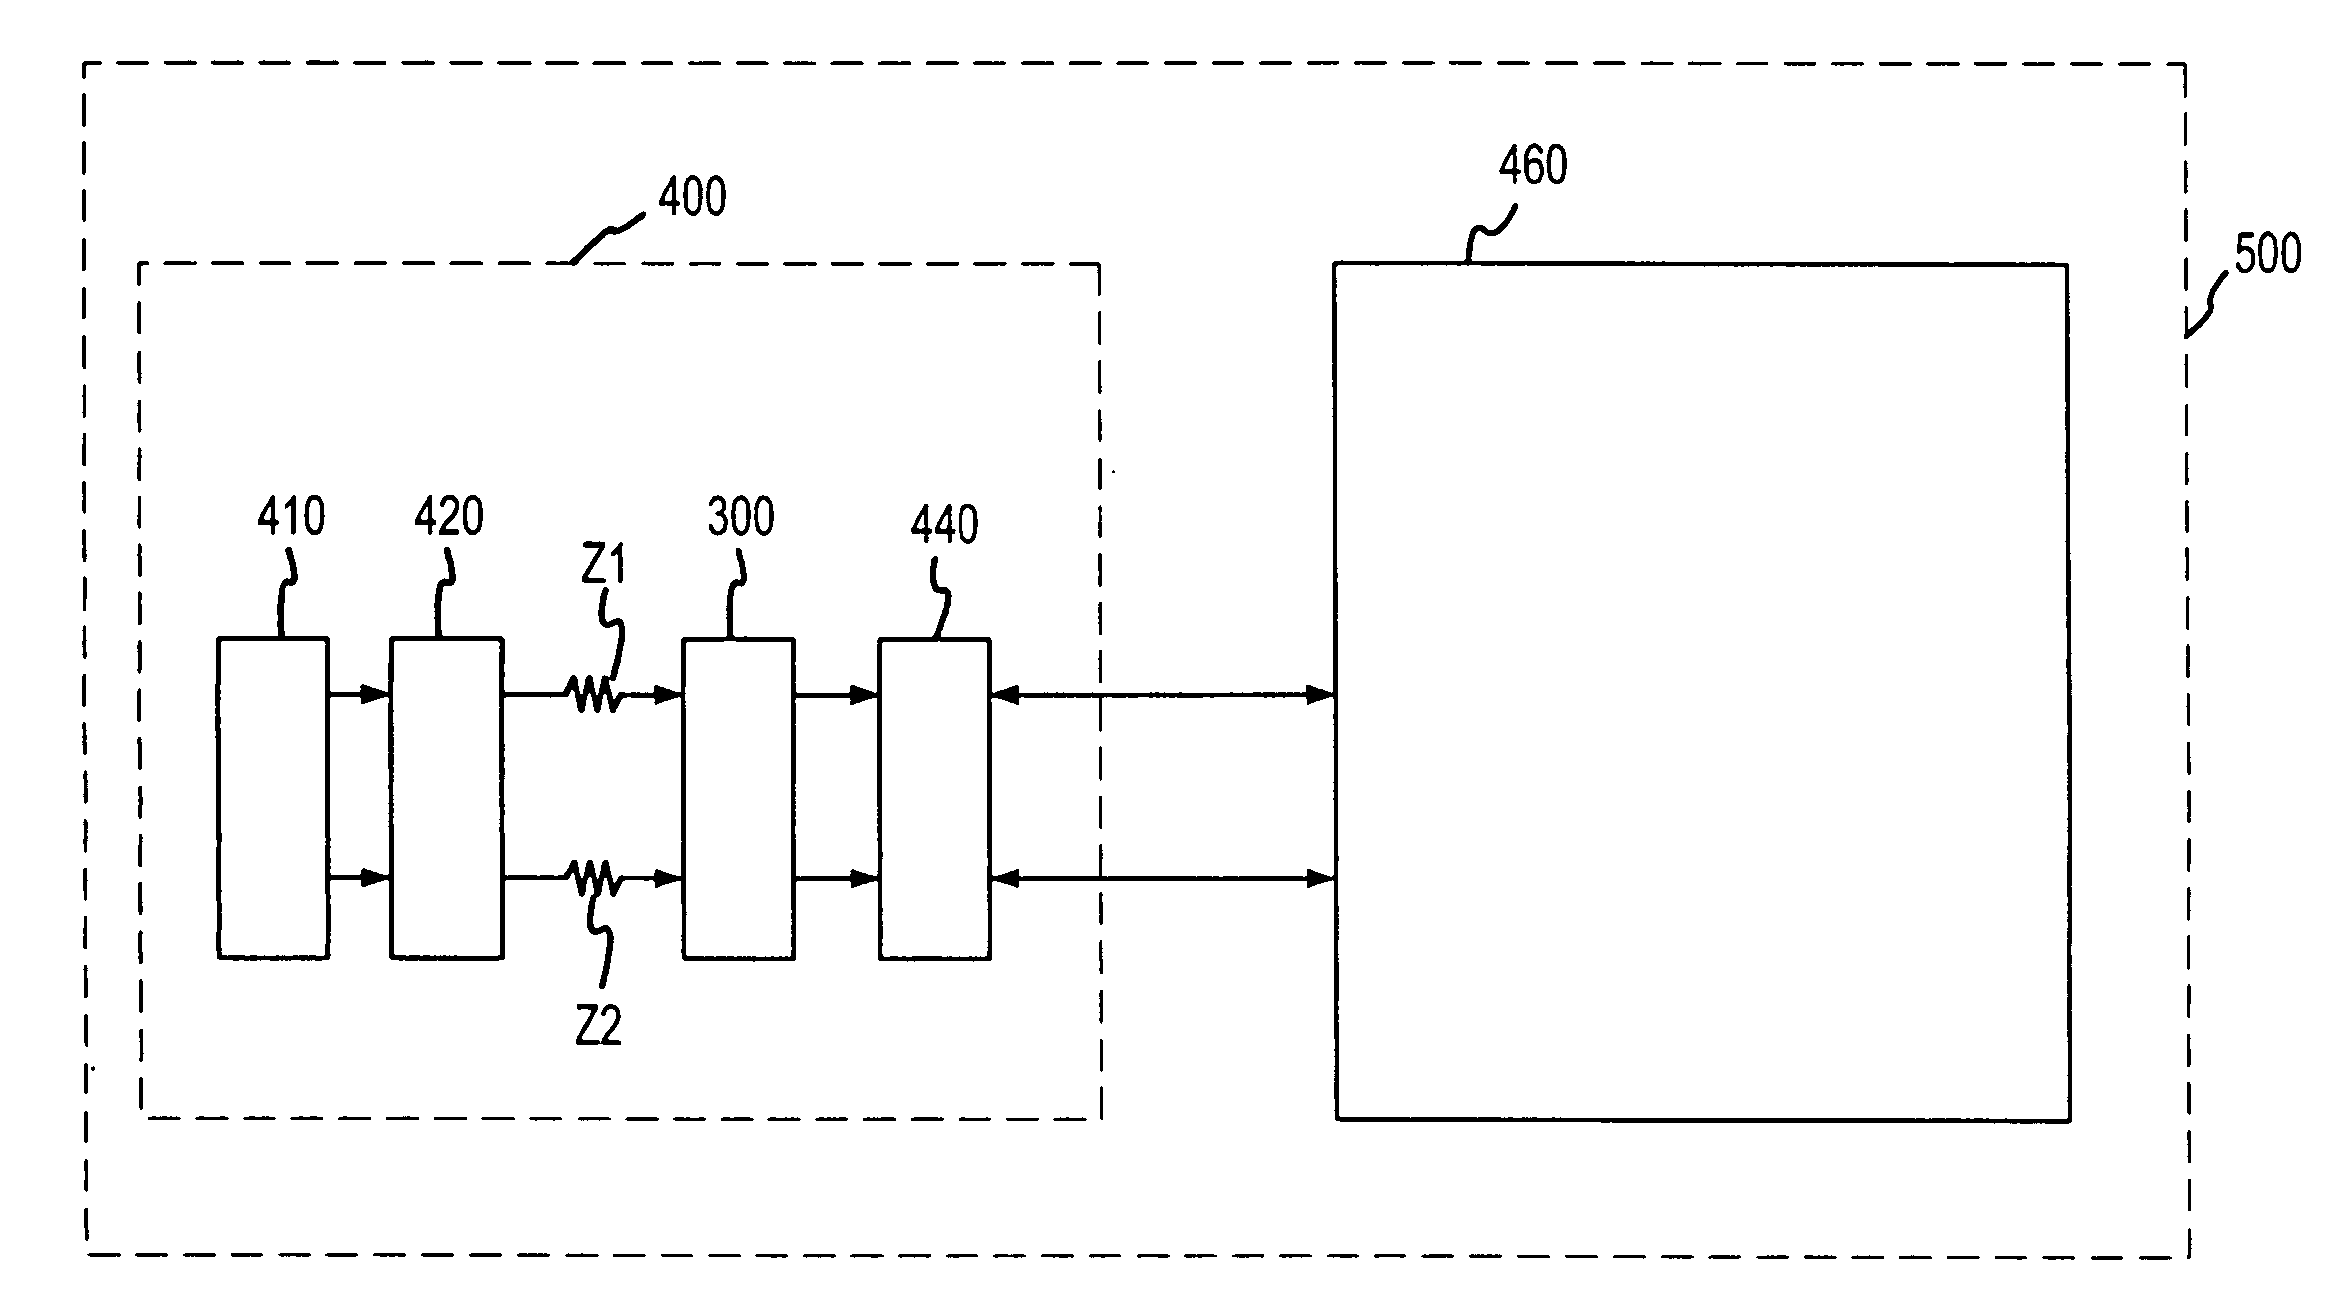 Constant delay zero standby differential logic receiver and method